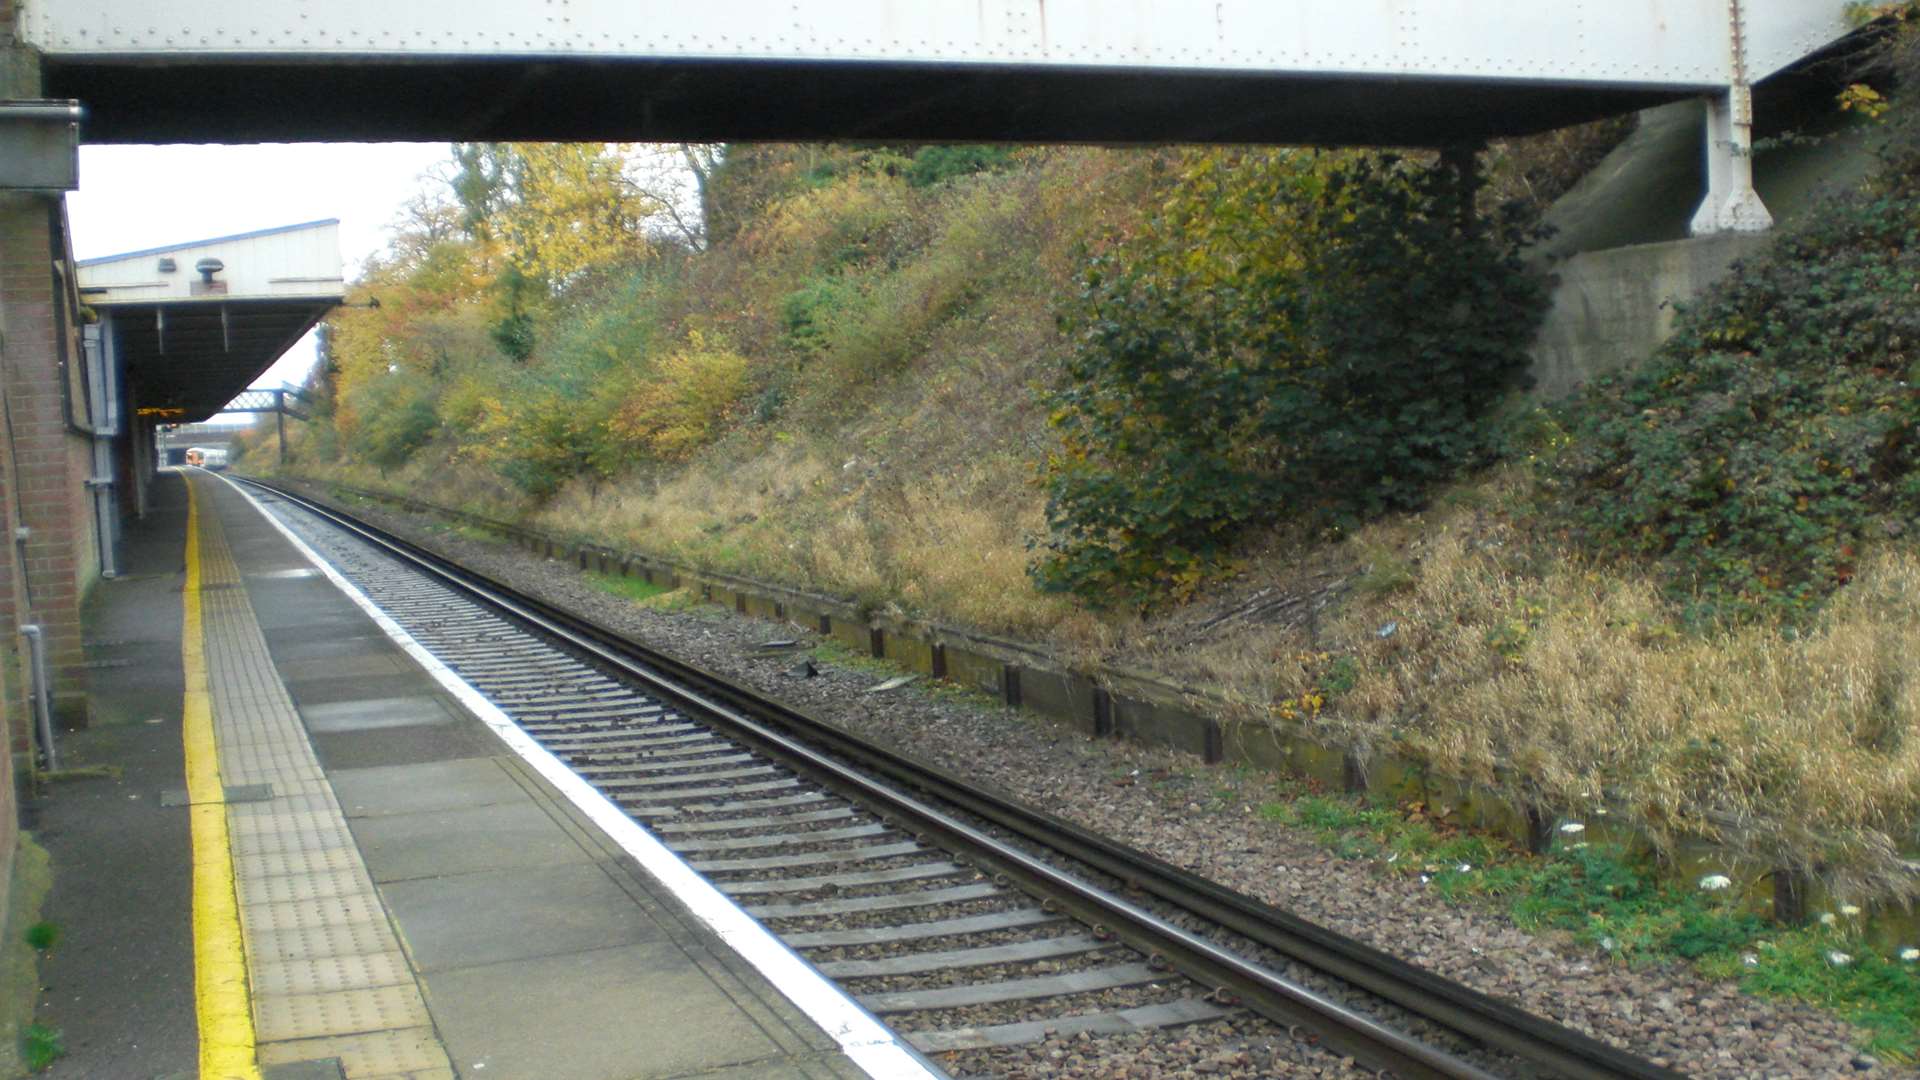 Swanley station, where the attack happened